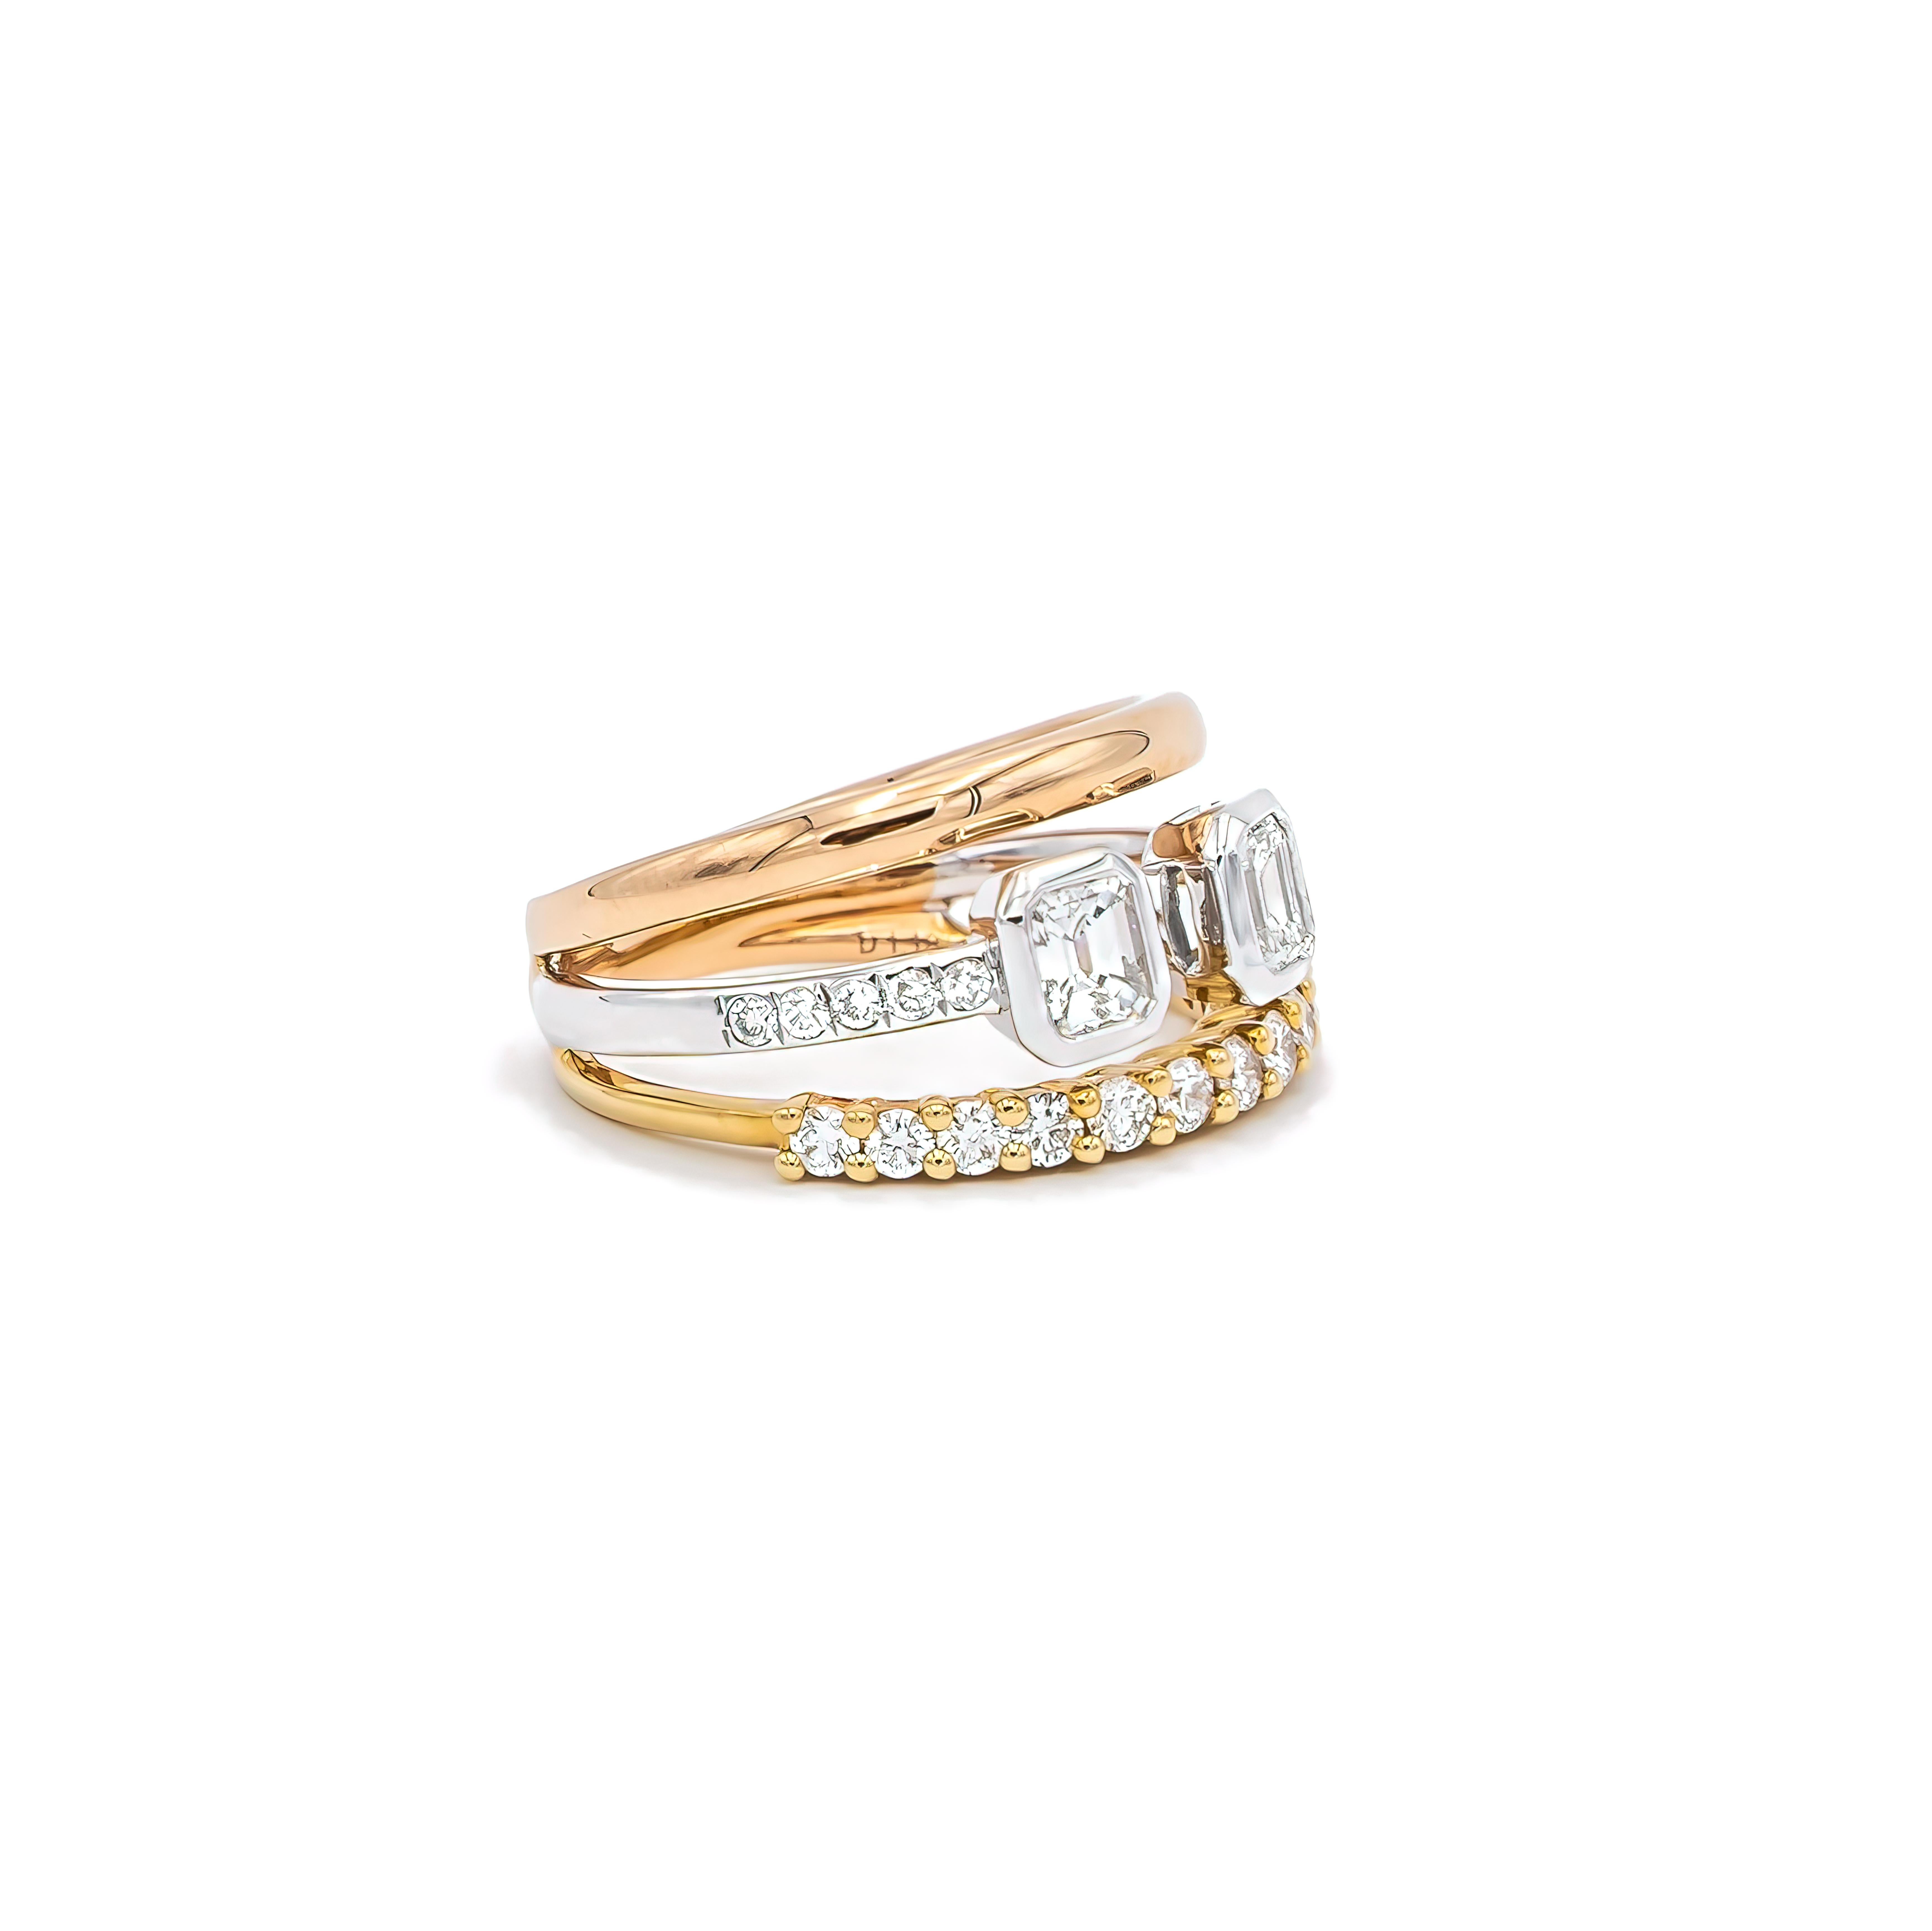 Total Ring Carat Weight: 1.18cts
Diamond Clarity: VS1
Diamond Color: G
Gold Purity: 18k
Gold Color: Rose, White and Yellow
Gold Weight: 7.17g
Diamond Type: Natural Diamond, Conflict-Free

Emerald Cut Diamond Bezel Gapped Set in Fancy Triple 18k Gold